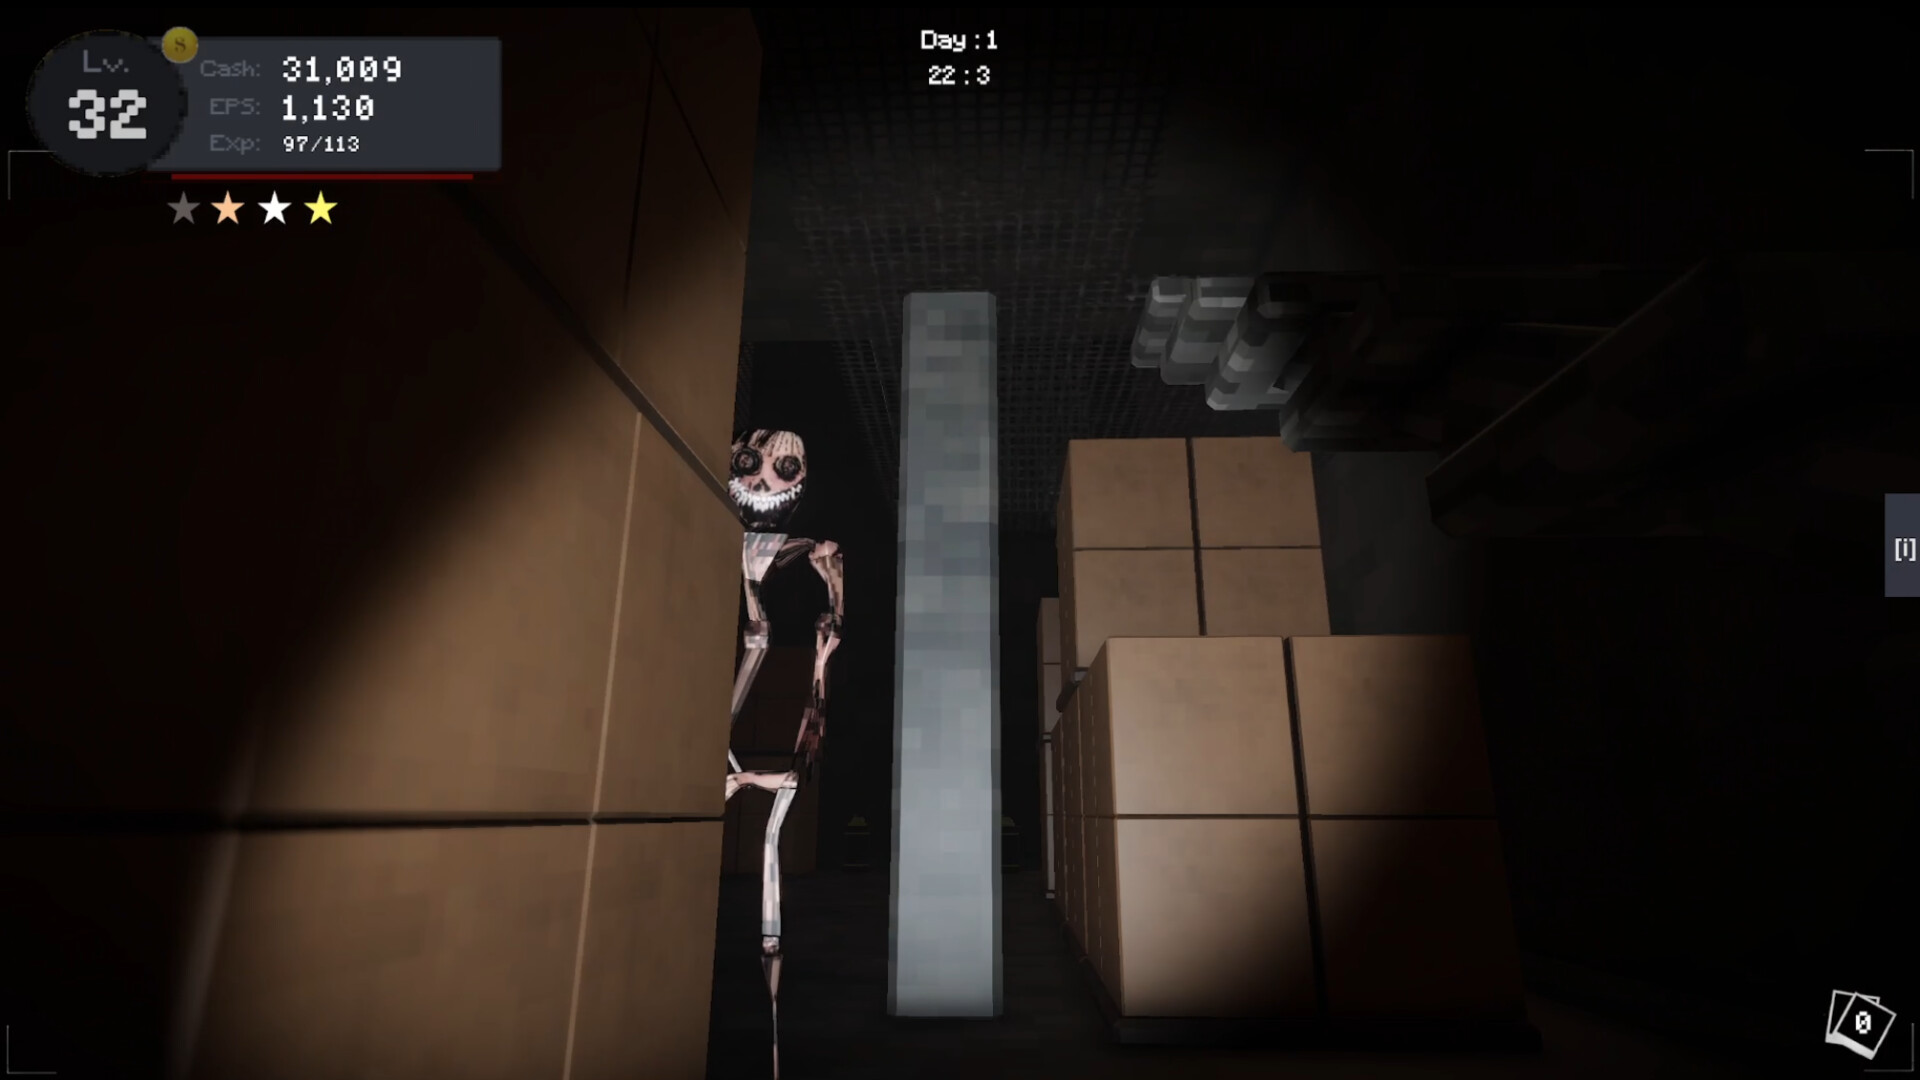 MORTUARY ASSISTANT #horror#scary#steam#pc#games#viral#mortuary #funny#, PC Gaming